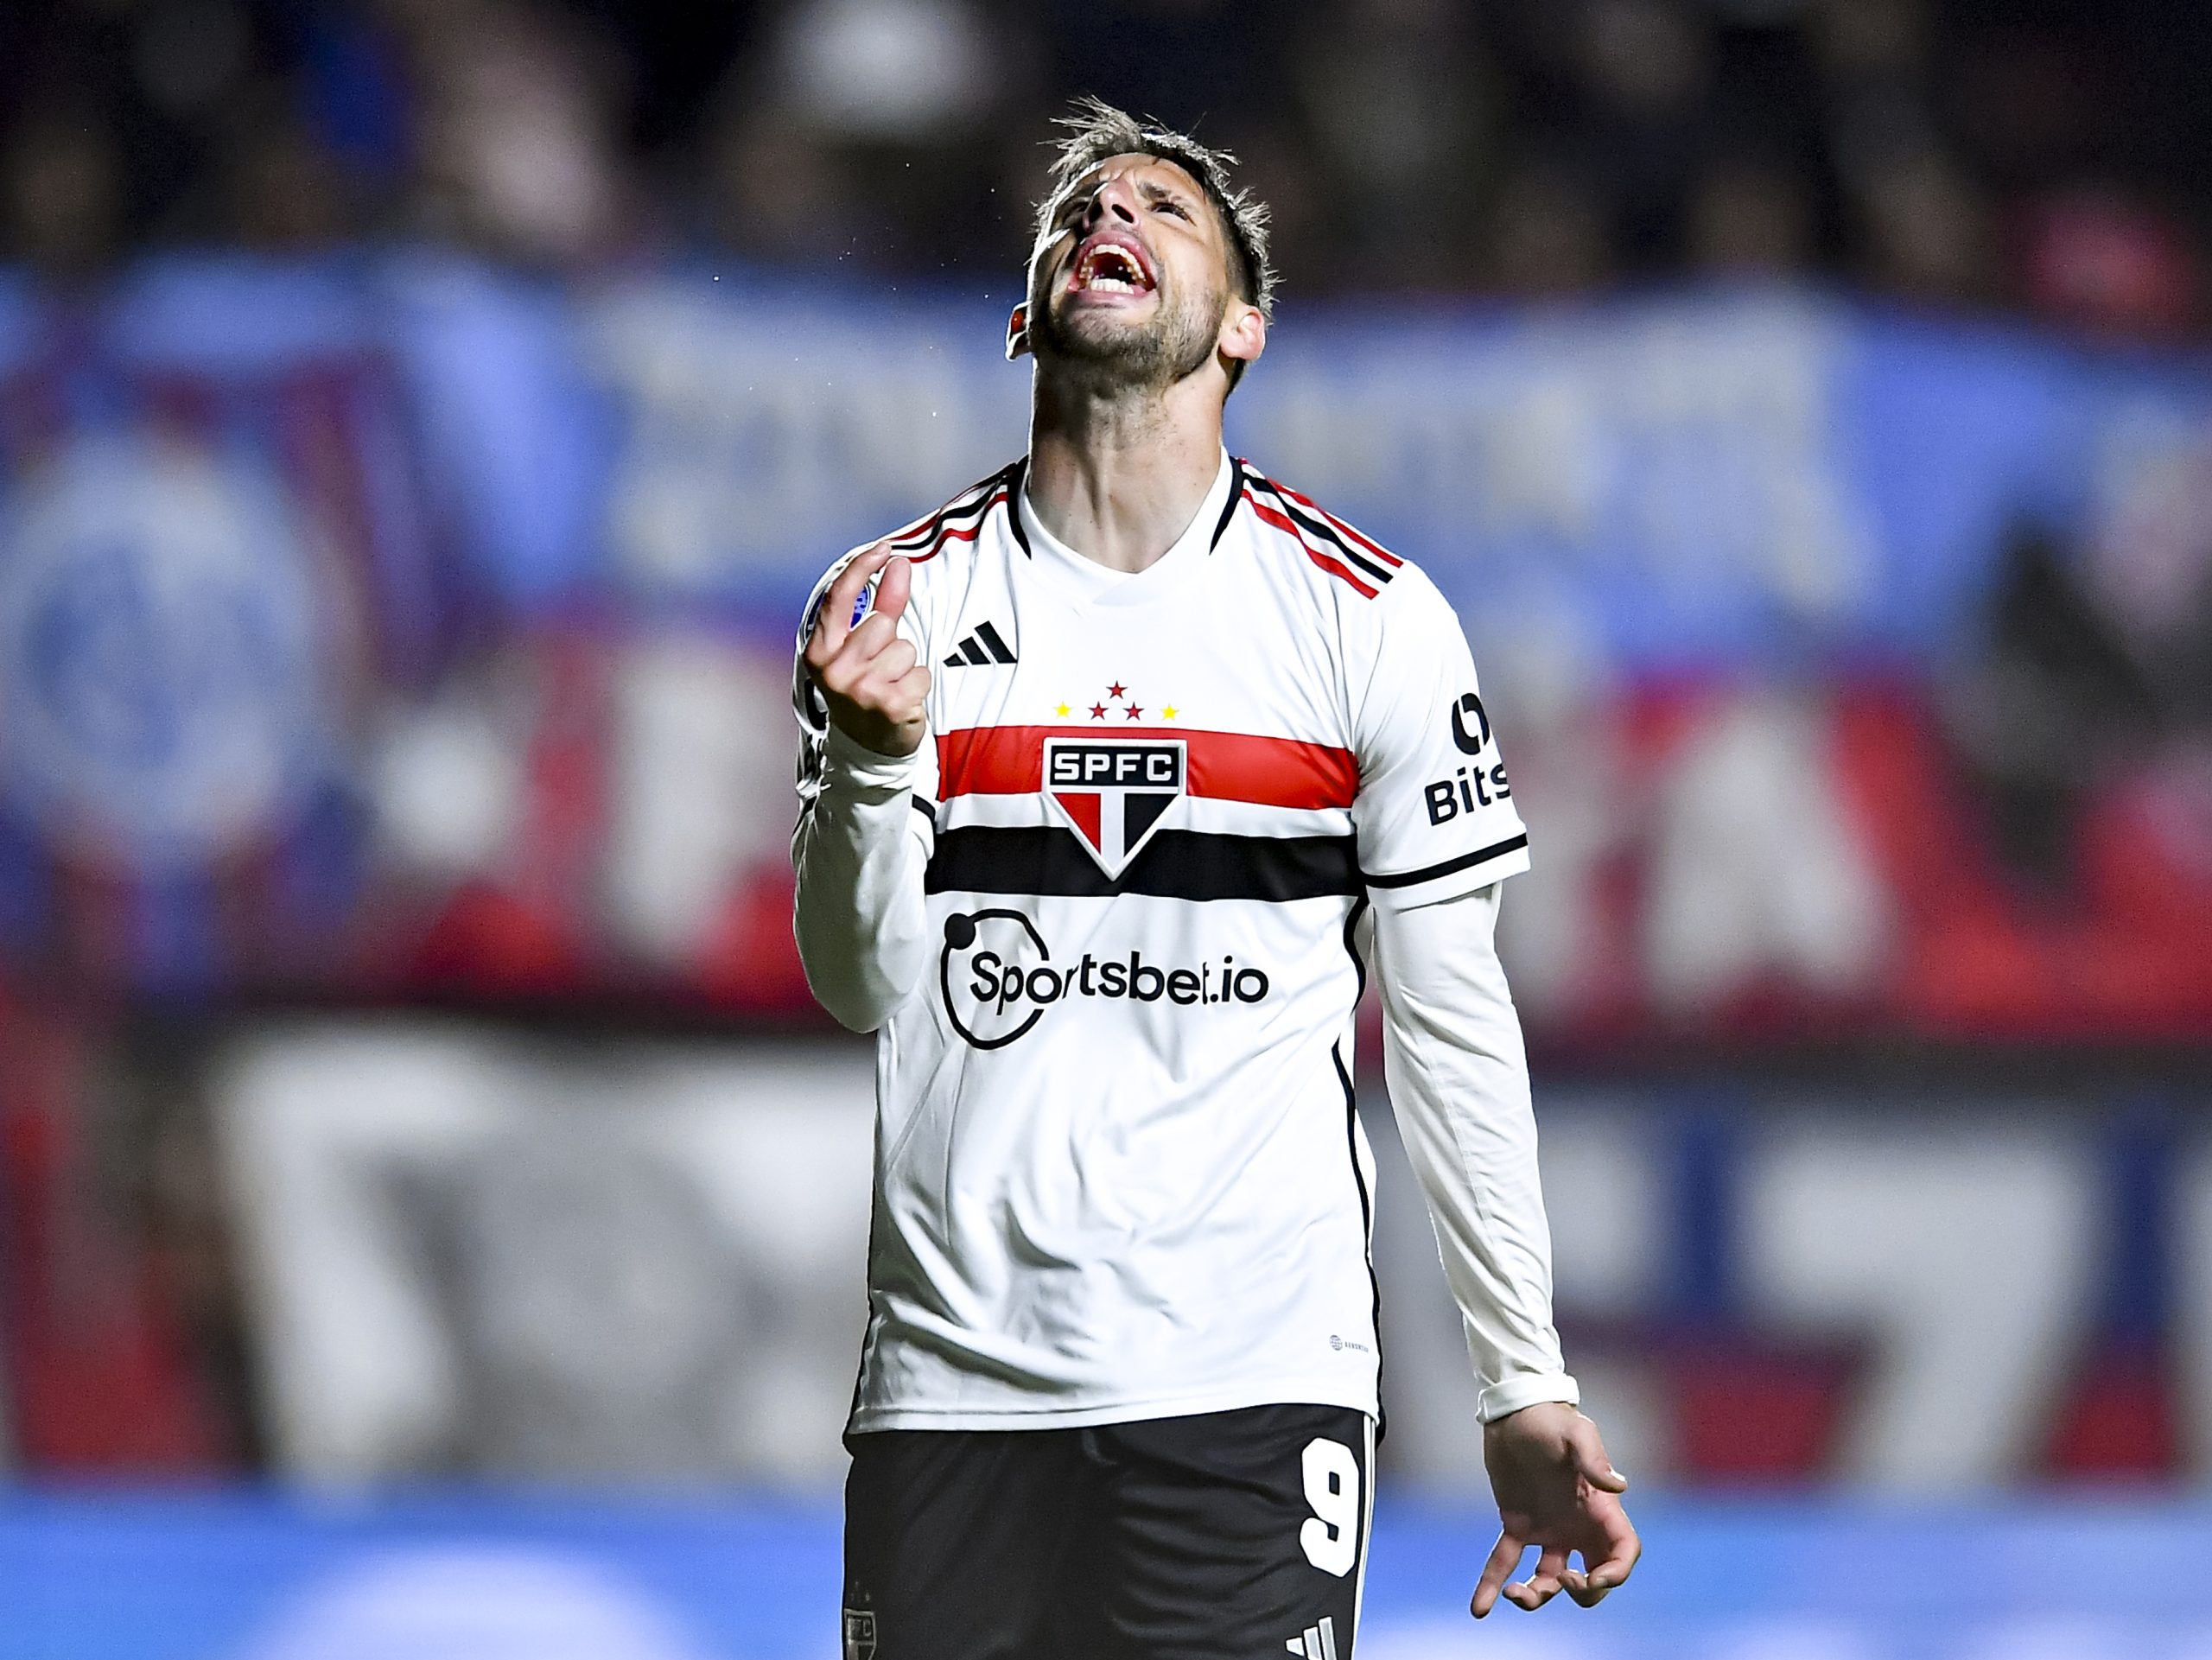 Calleri contra o San Lorenzo (Photo by Marcelo Endelli/Getty Images)